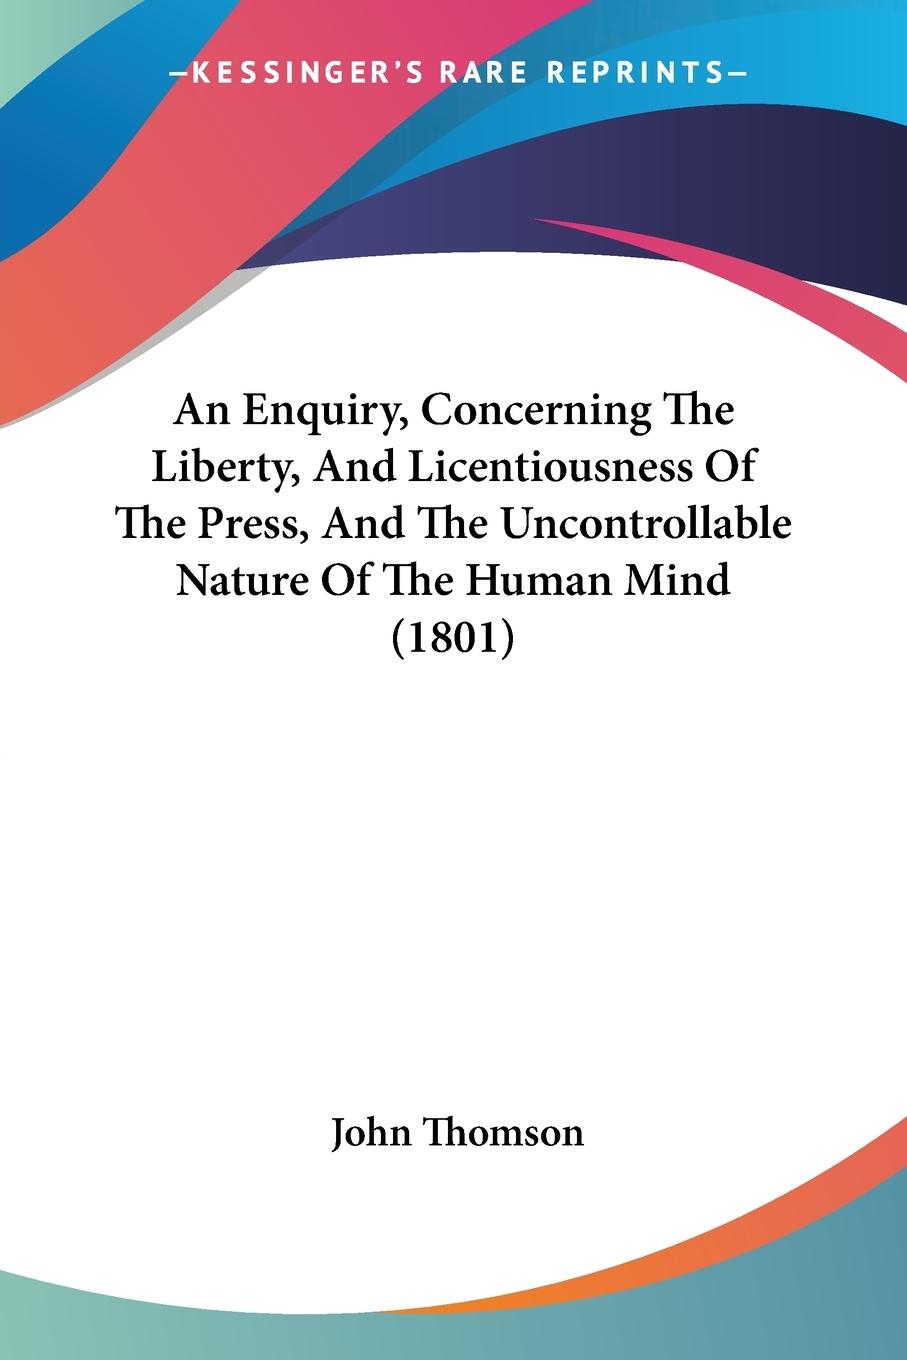 An Enquiry, Concerning The Liberty, And Licentiousness Of The Press, And The Uncontrollable Nature Of The Human Mind (1801) - Thomson, John